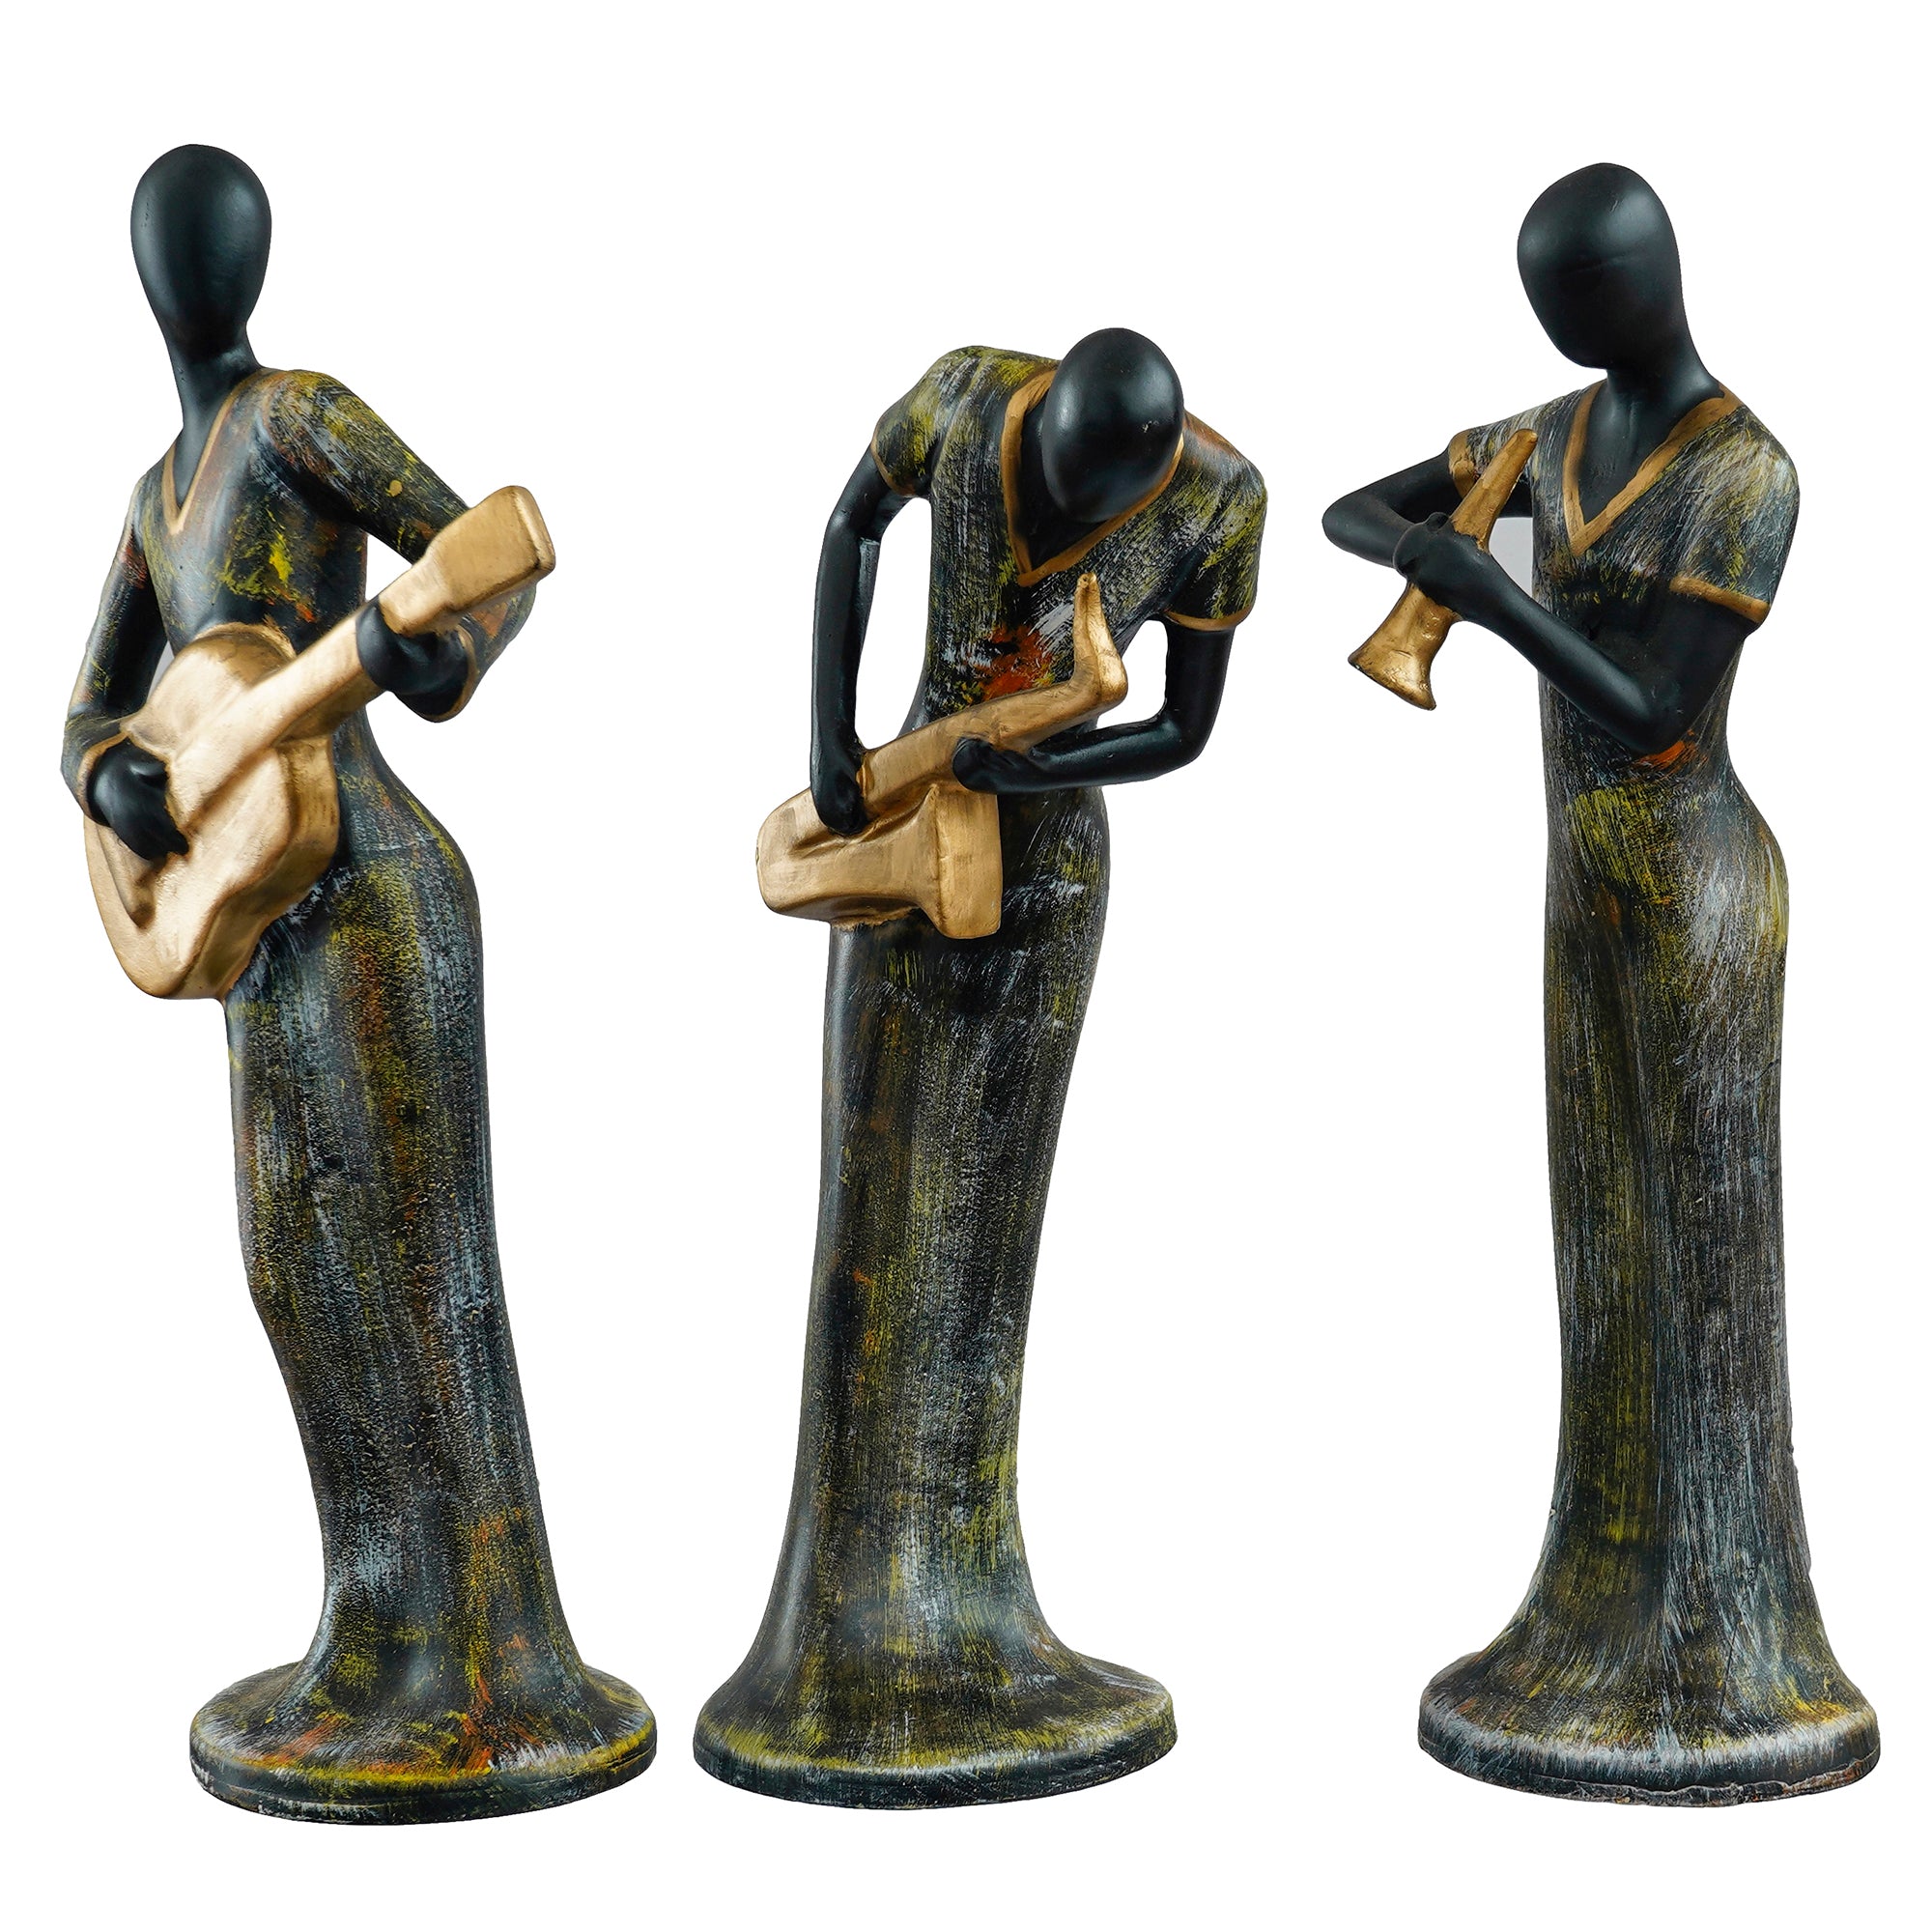 Grey and Black Polyresin Set of 3 Ladies figurines Playing Guitar, Clarinet, Saxophone Musical Instrument Handcrafted Decorative Showpiece 5